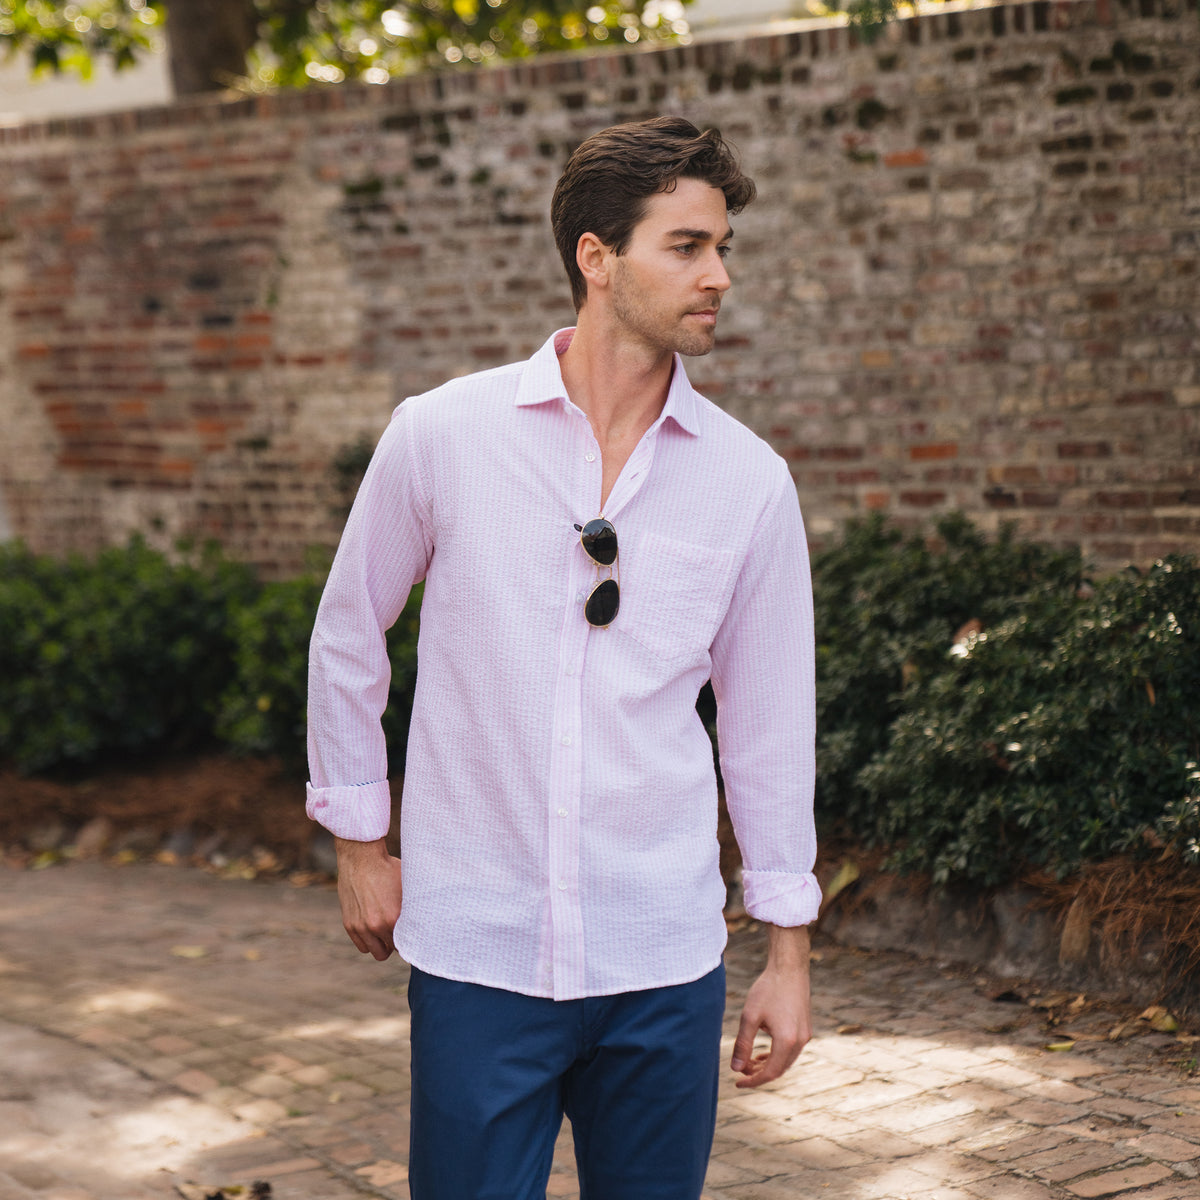 &lt;p&gt;Pretty in pink and stunning in seersucker. Ready for all your spring good times.&lt;/p&gt; &lt;p&gt;100% Cotton Seersucker • Spread Collar • Long Sleeve • Chest Pocket • Machine Washable • Made in Italy&lt;span data-mce-fragment=&quot;1&quot;&gt; &lt;/span&gt;&lt;/p&gt;